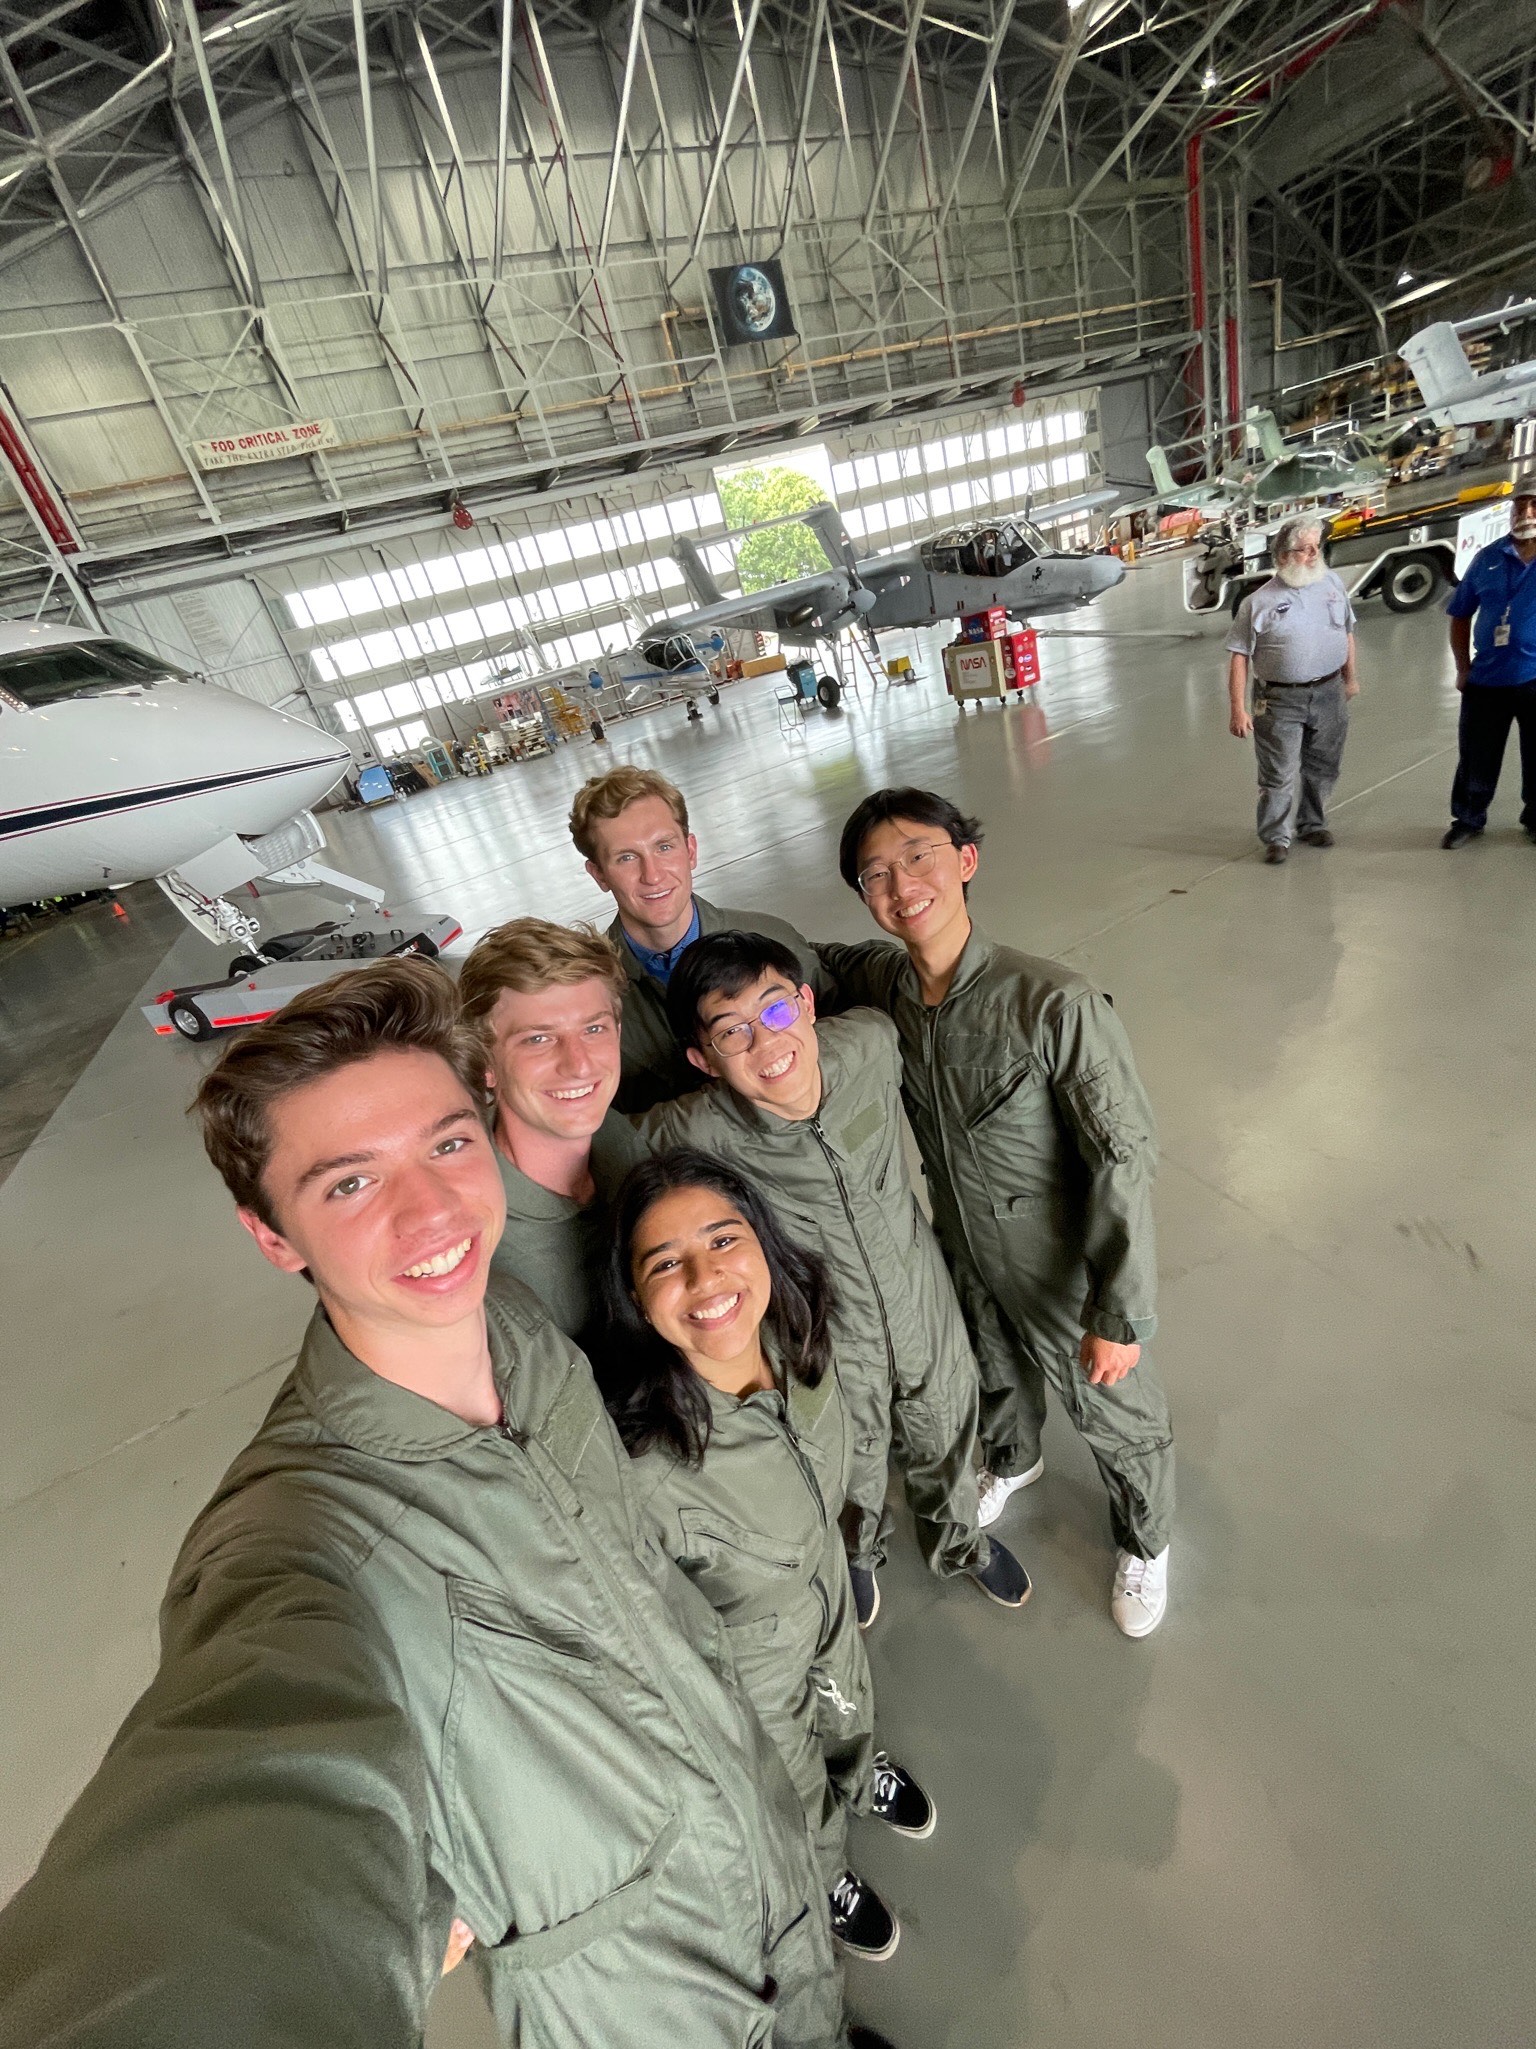 group of six students pose wearing flight suits in an airplane hangar with planes in background